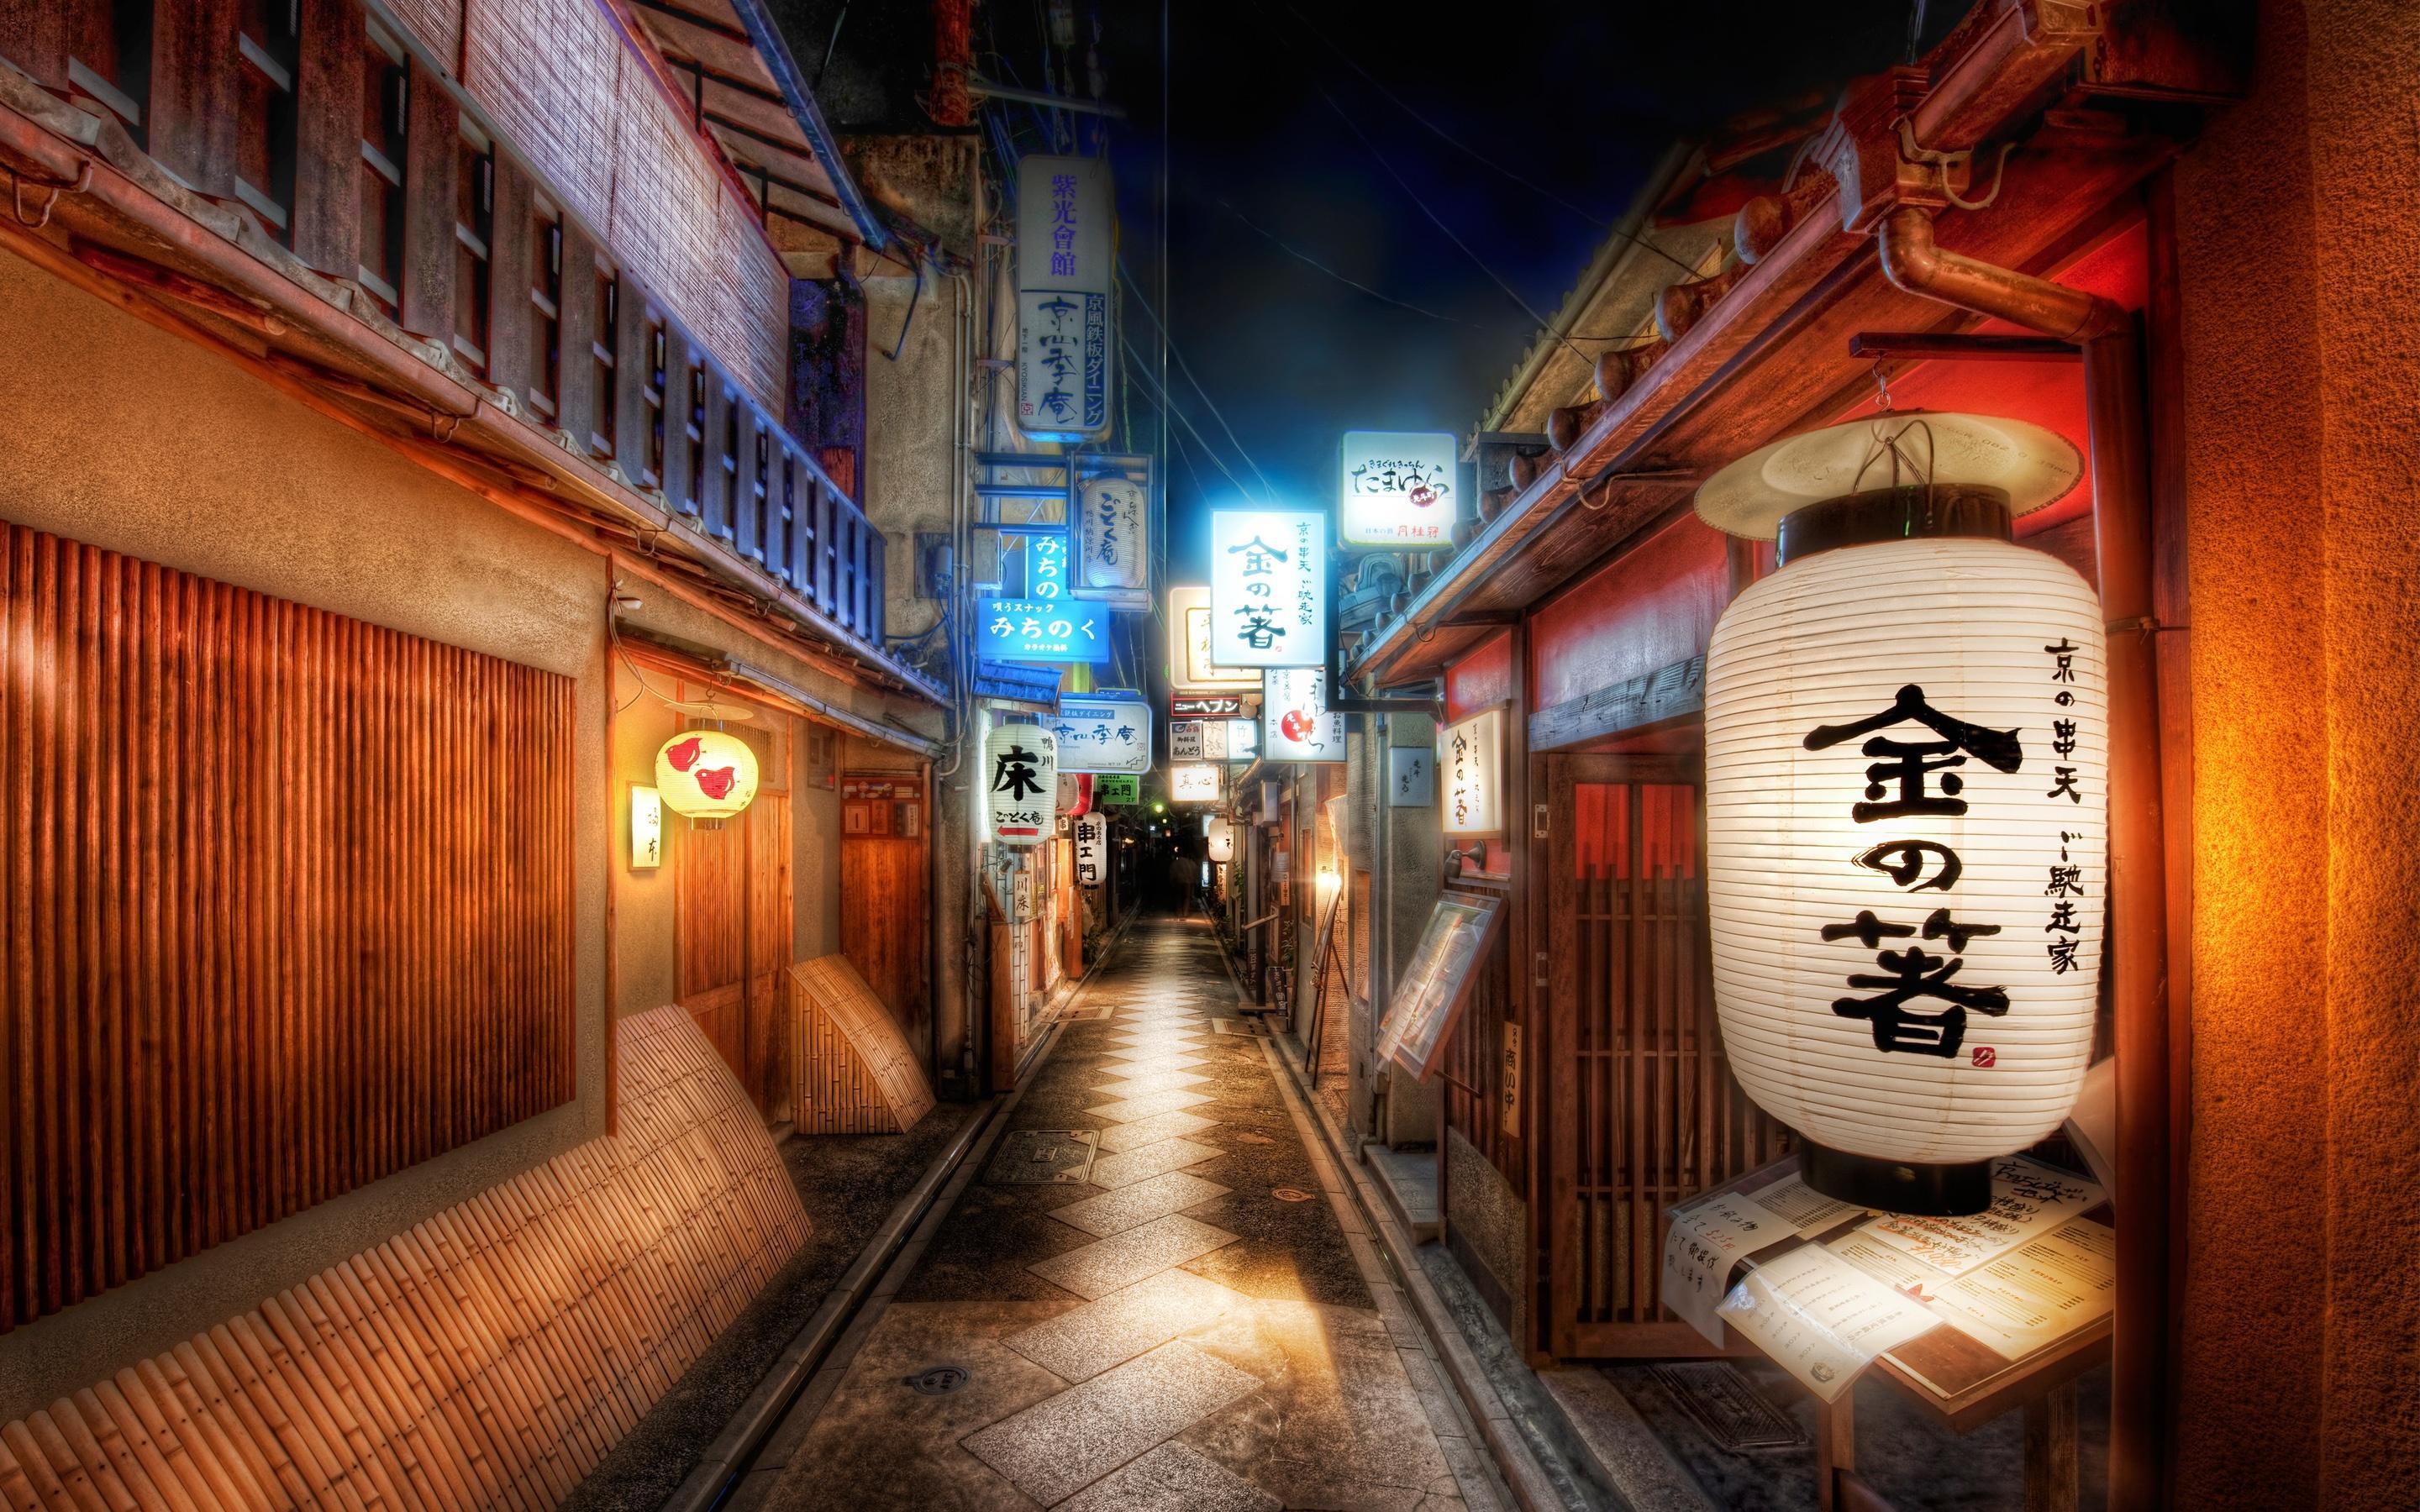 Chinatown HDR Wallpaper in jpg format for free download